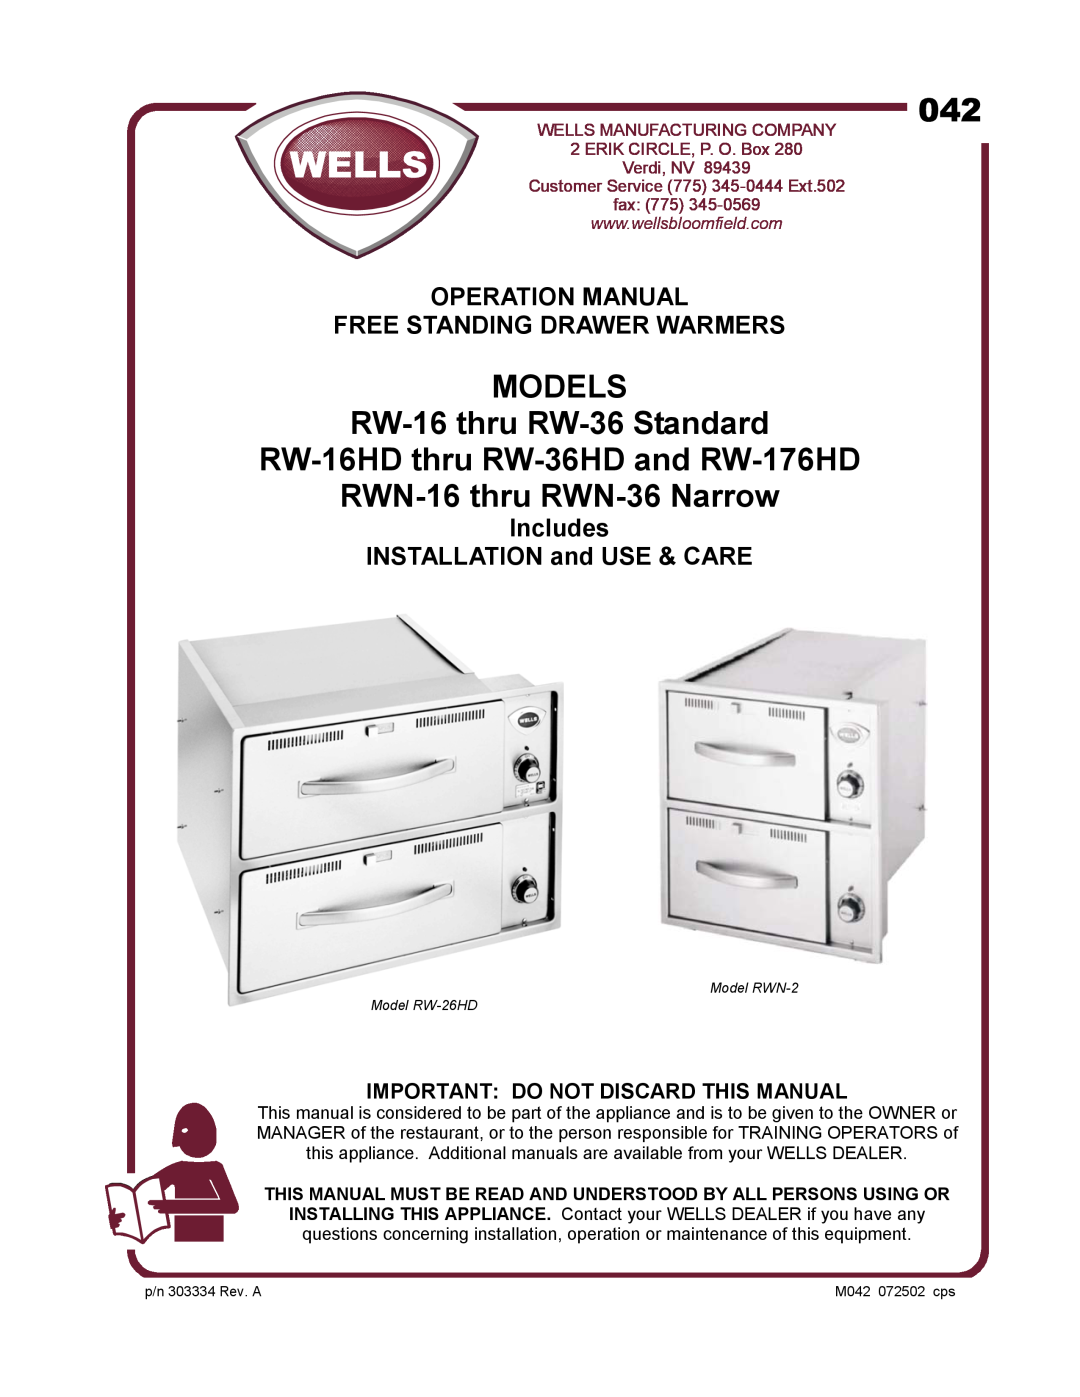 Wells RWN-2, RW-16 thru RW-36 operation manual Includes INSTALLATION and USE & CARE, Important Do Not Discard This Manual 